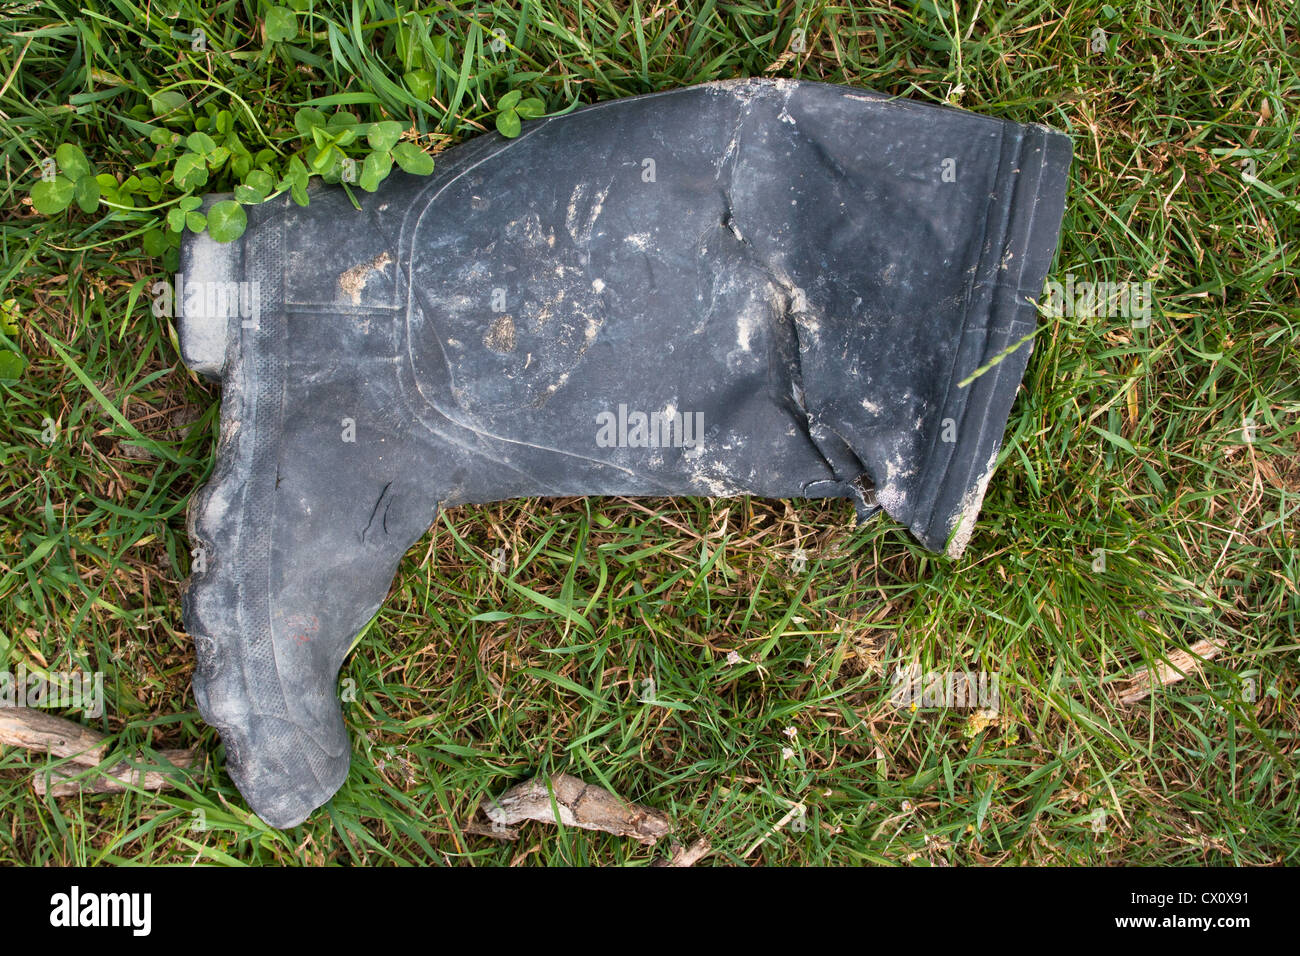 Old fisherman's boot or Fisherman's Old Boot! Found lying in a field beside a river. Stock Photo